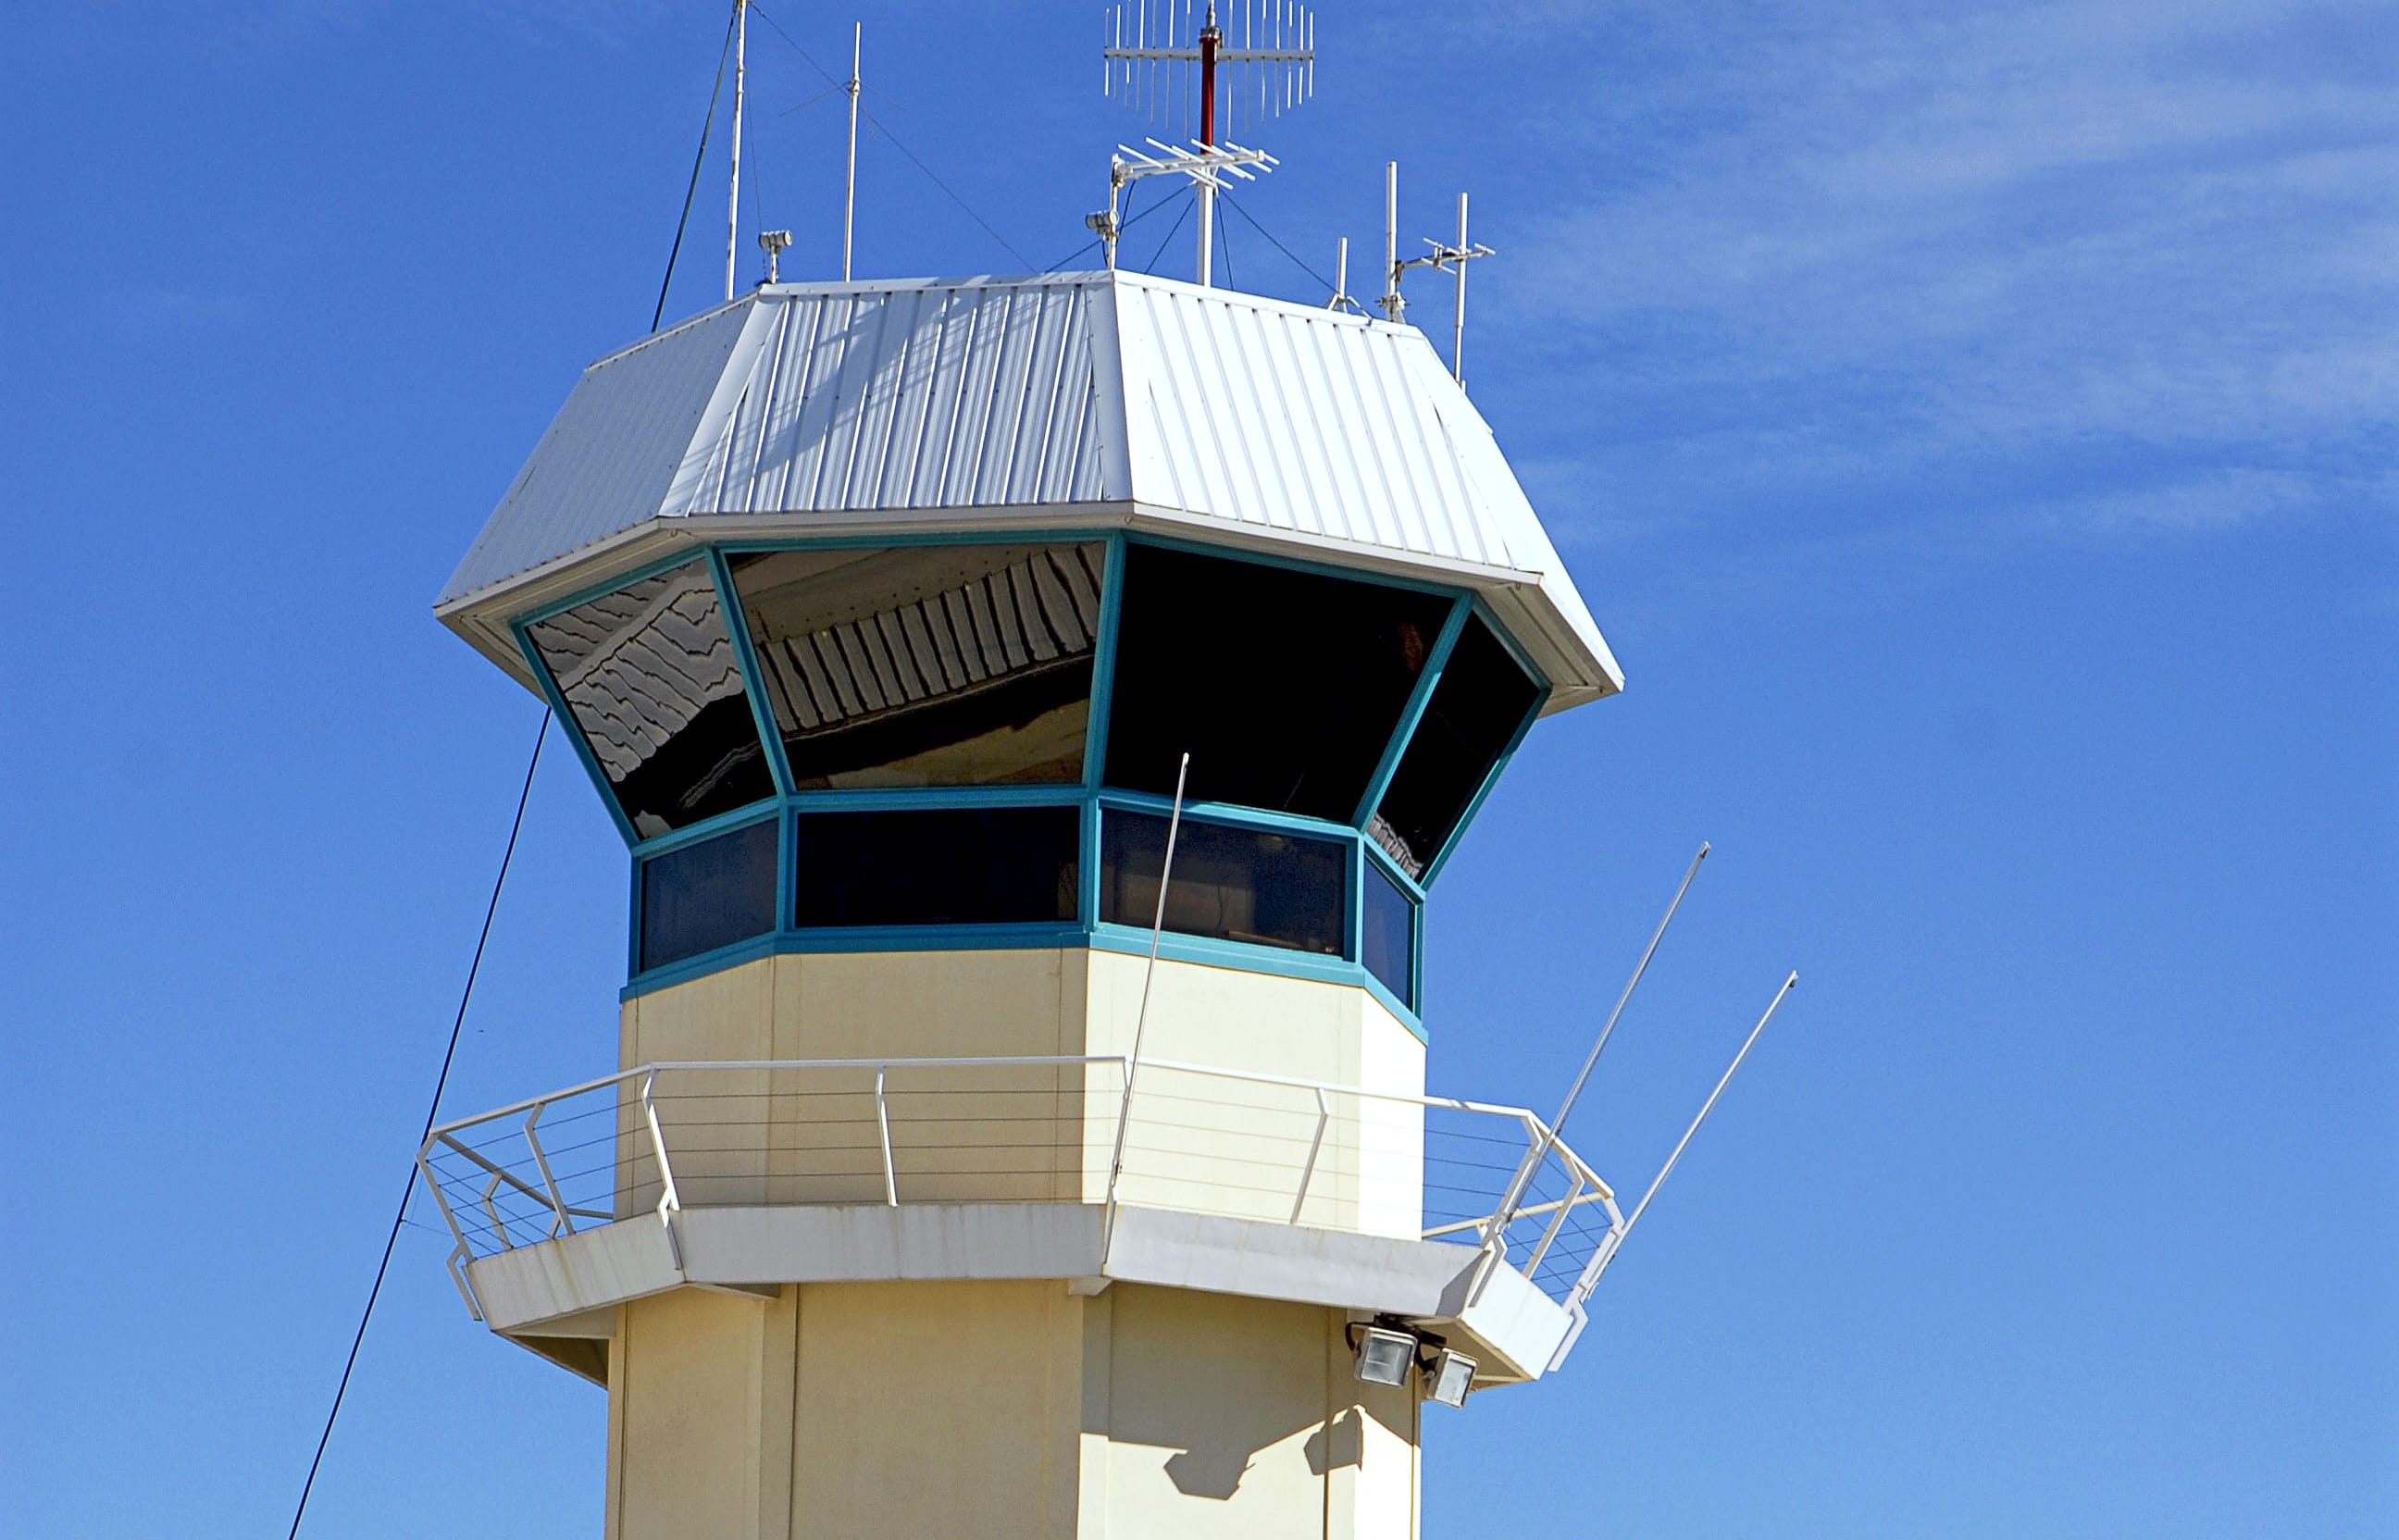 The air traffic control tower at the Noumea's Magenta airport.